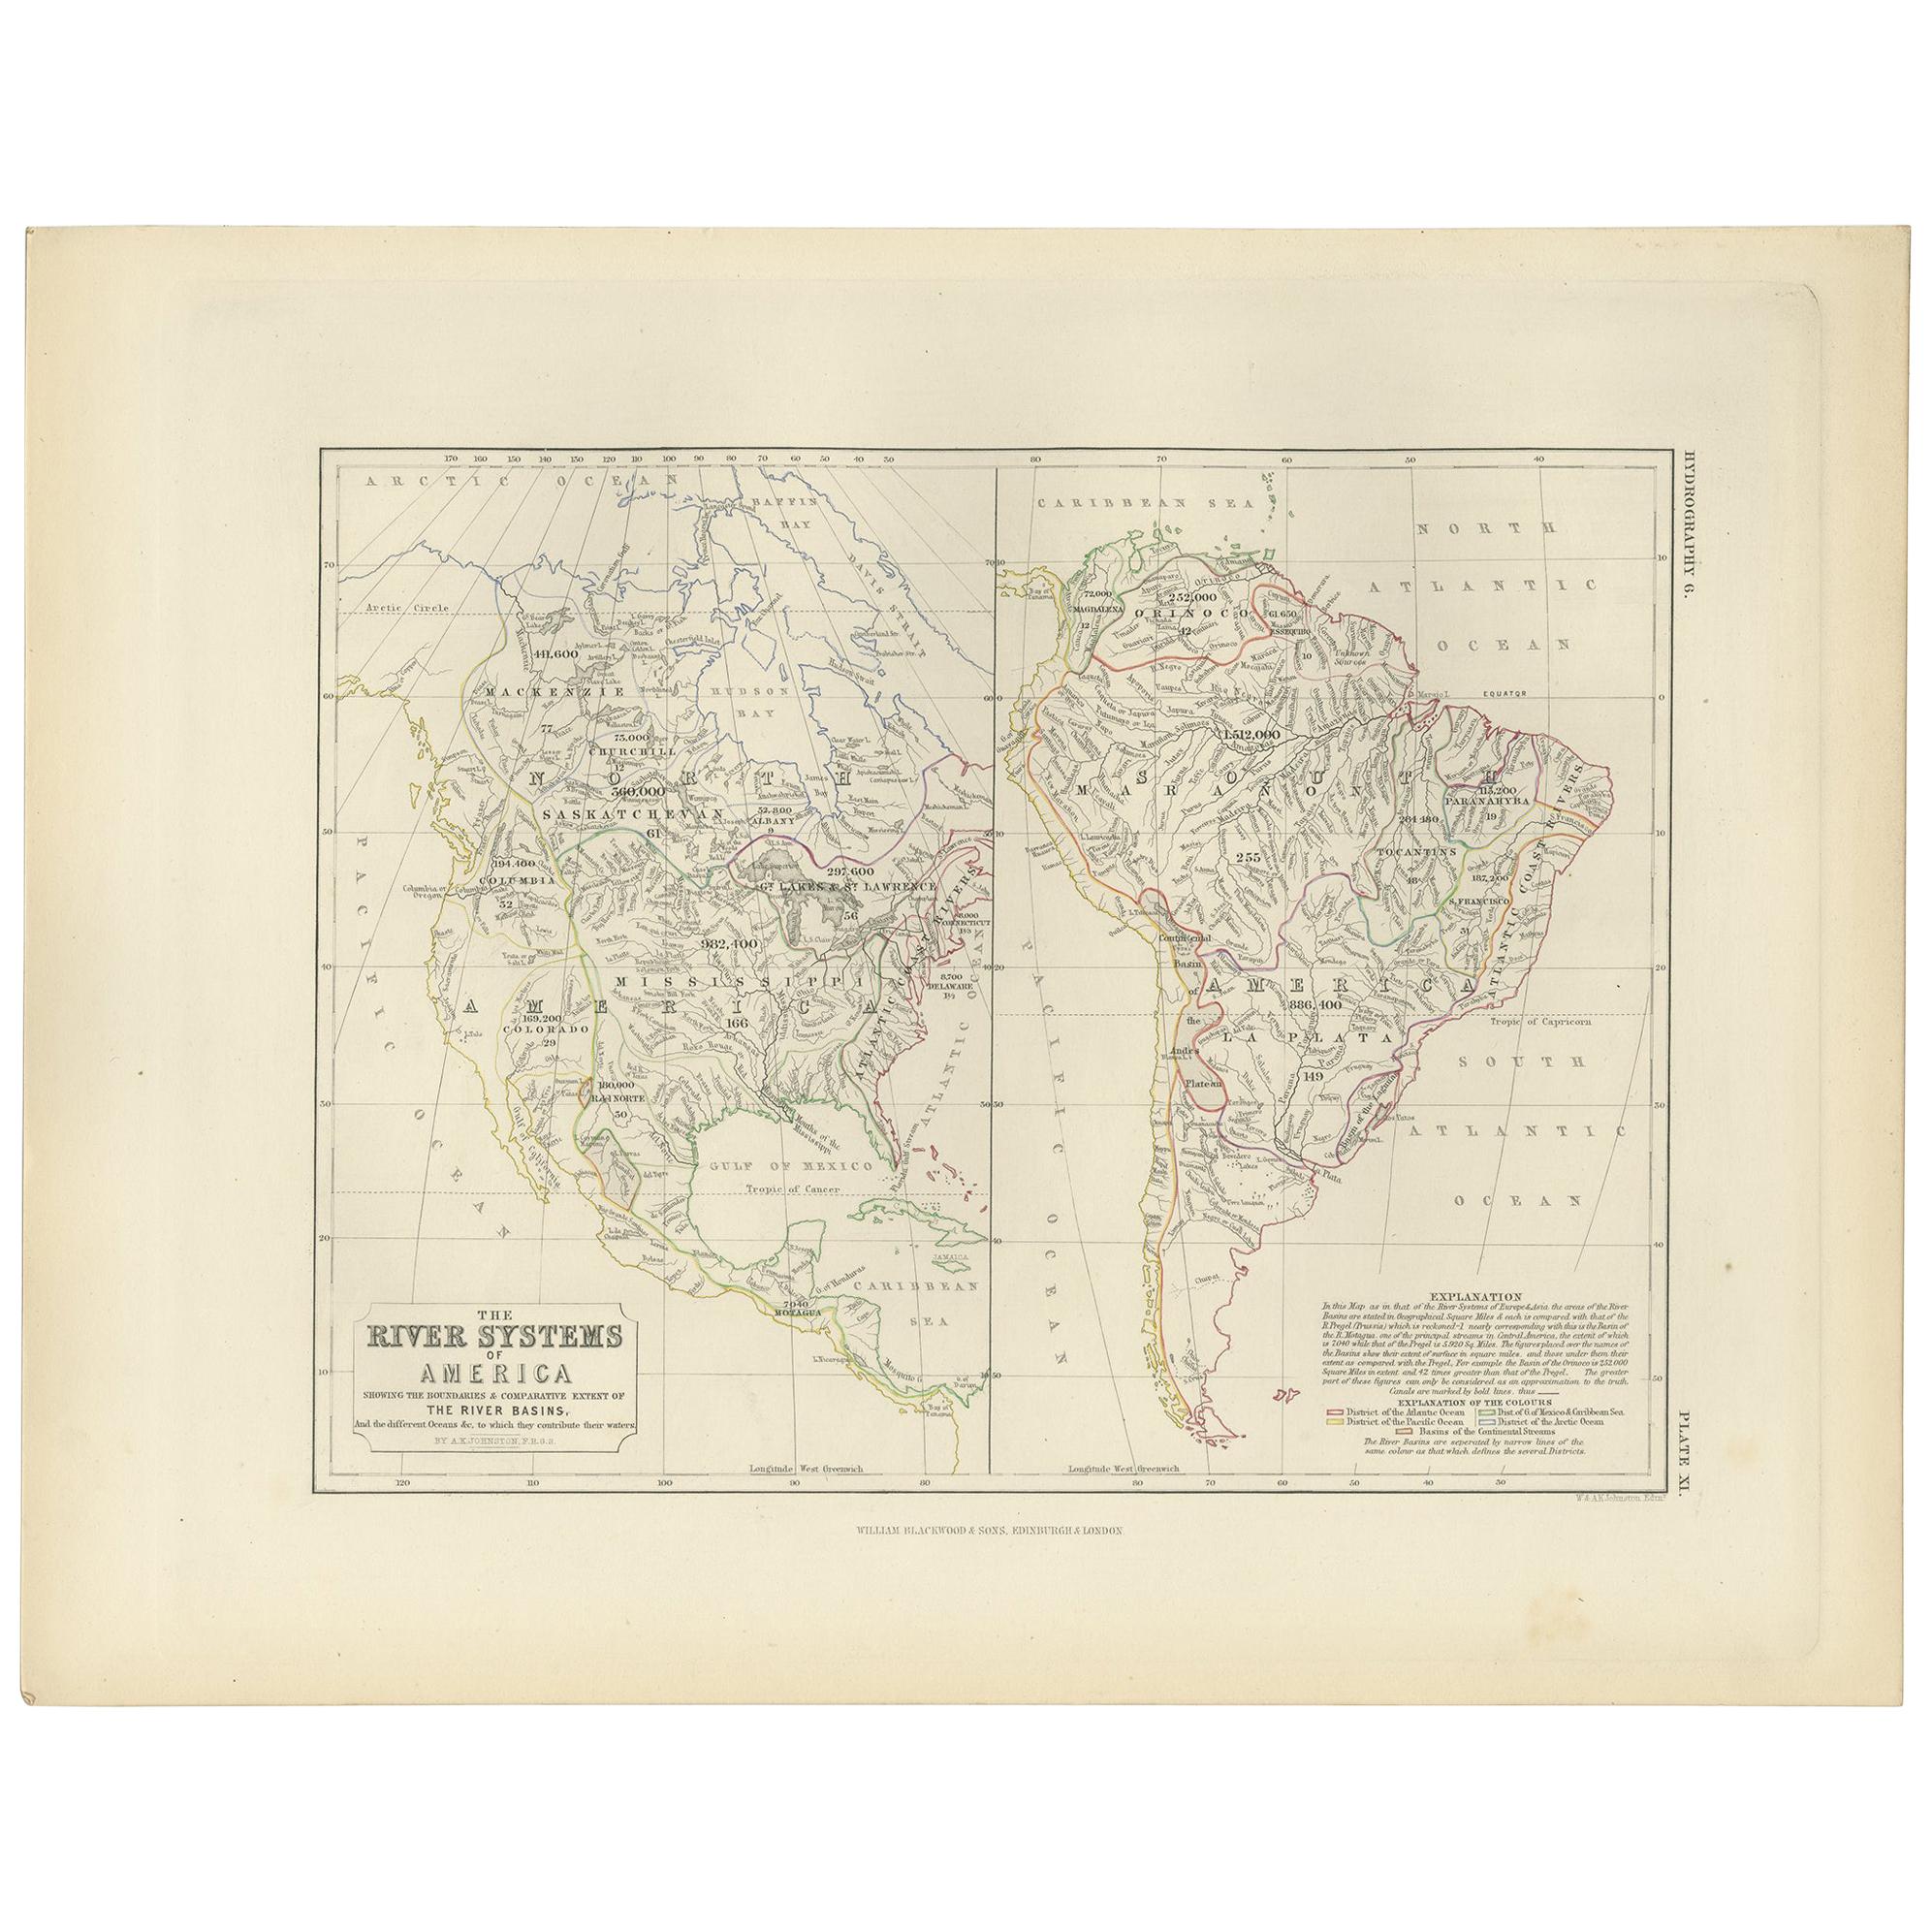 Antique Map of the River Systems of America by Johnston, '1850' For Sale